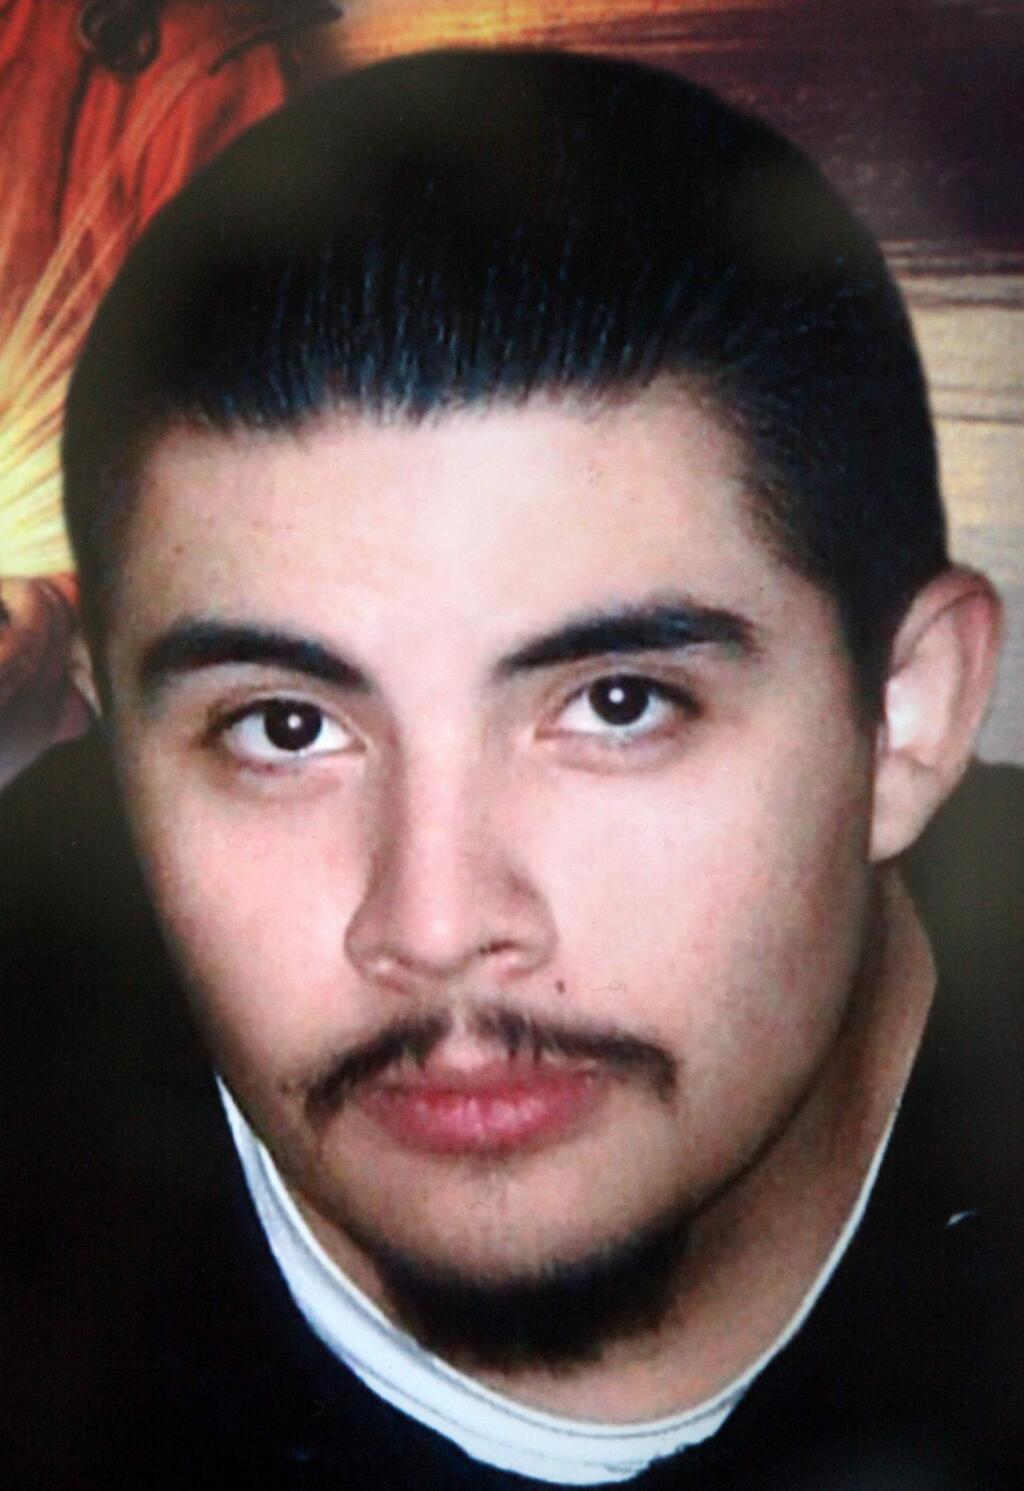 Alejandro Ortega was shot dead on a southwest Santa Rosa street Nov. 28, after years in and out of trouble and associating with gangs. (handout photo from family)